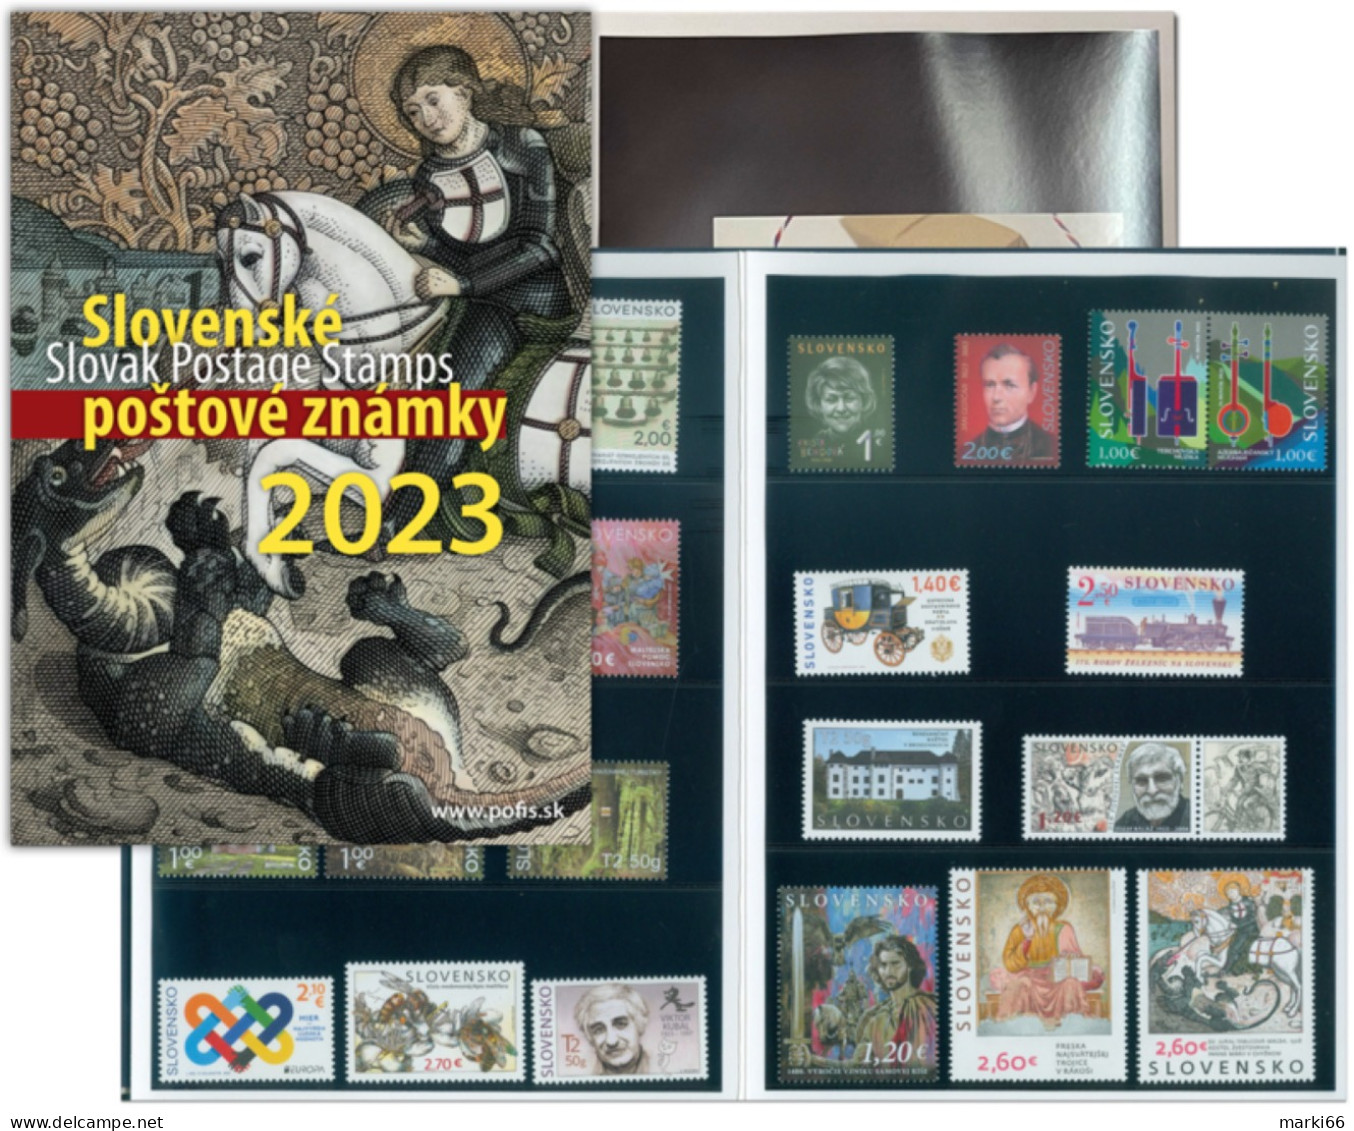 Slovakia - 2023 - Complete Annual Set - All Stamps And Souvenir Sheet Of 2023 - Full Years